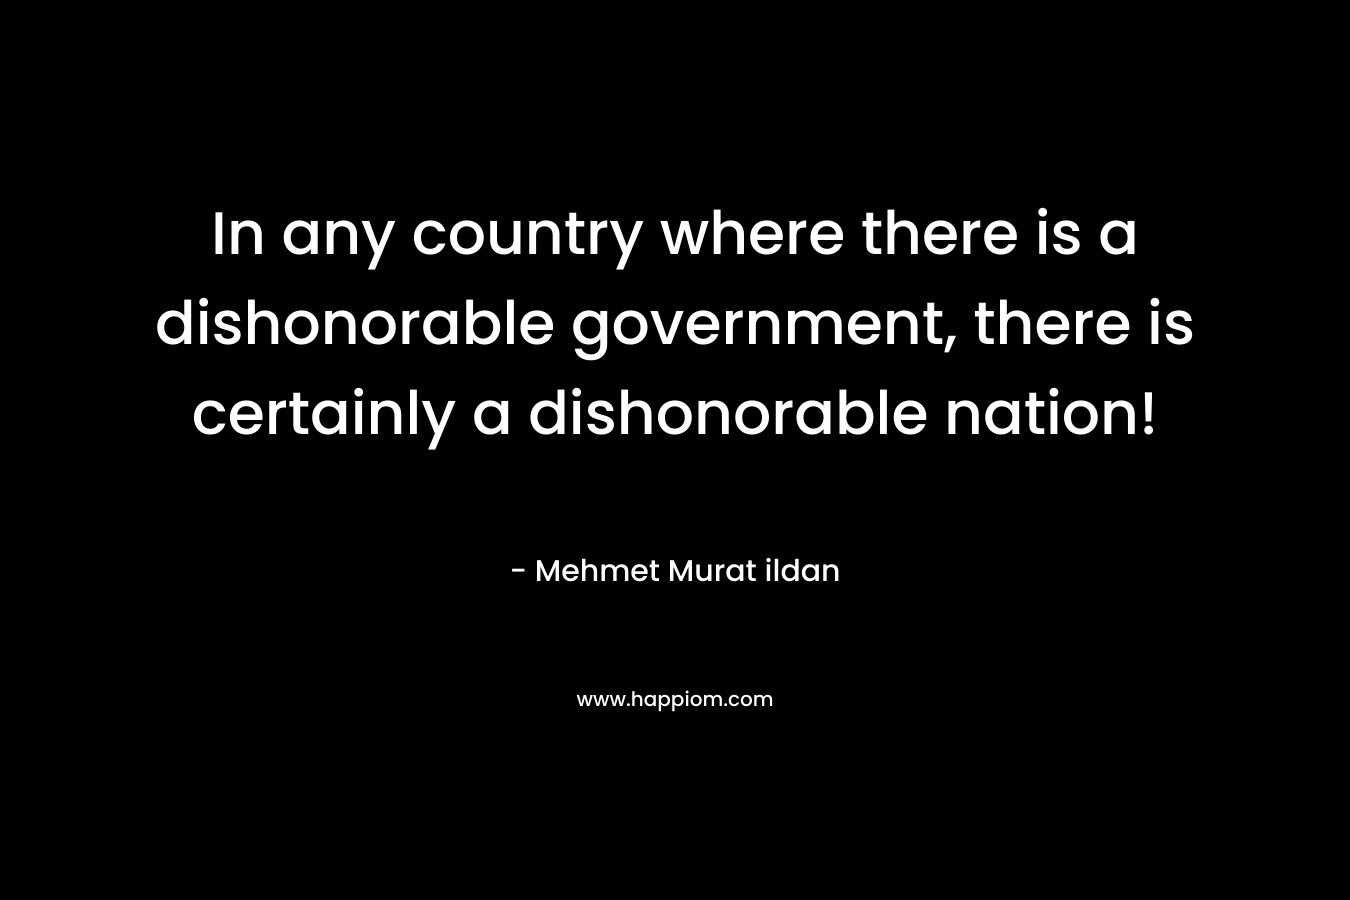 In any country where there is a dishonorable government, there is certainly a dishonorable nation! – Mehmet Murat ildan